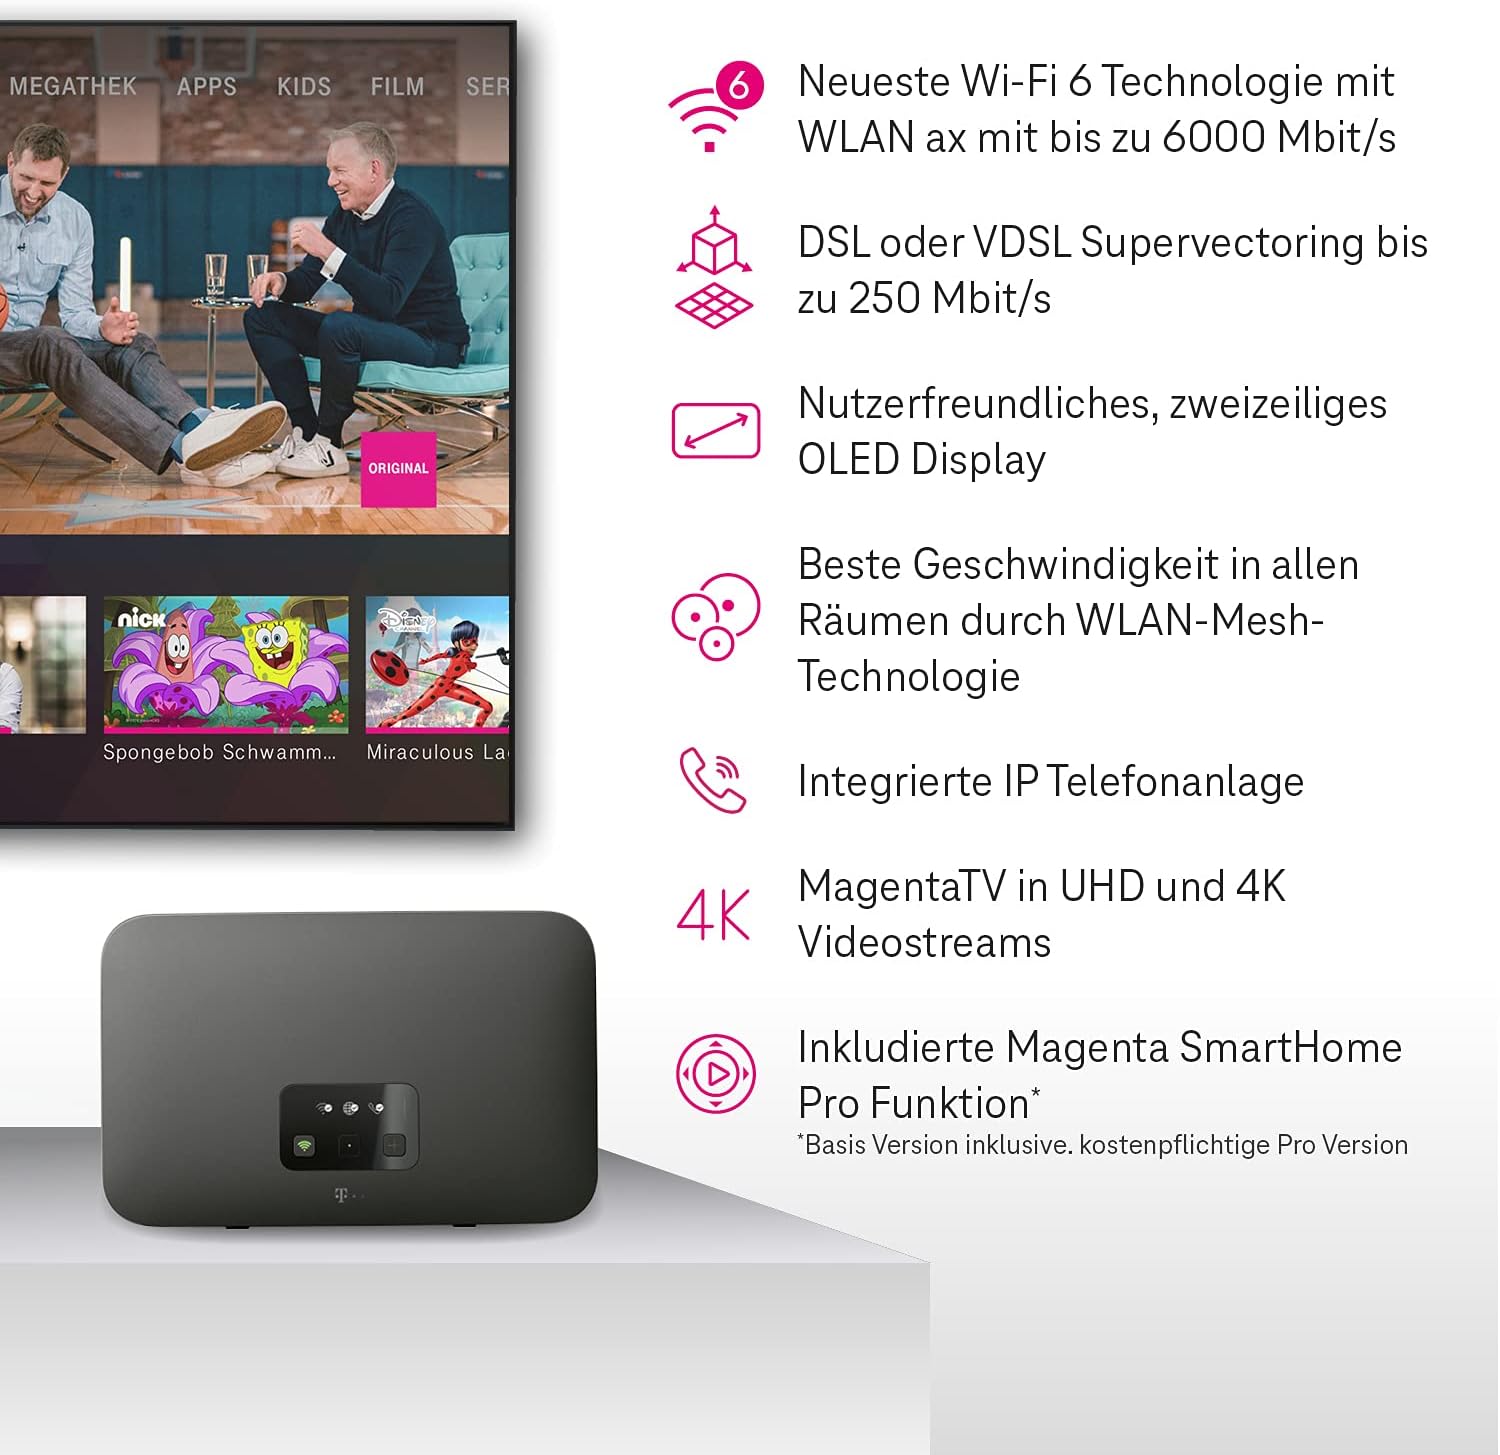 MagentaTV One, Android TV Box with WLAN  LAN, MagentaTV with 75+ HD Transmitters, 4K UHD, HDR, Live  Time Offset, Streaming Services (Netflix, Disney+, RTL+, DAZN, Sky Ticket, Apple TV+)  App Store